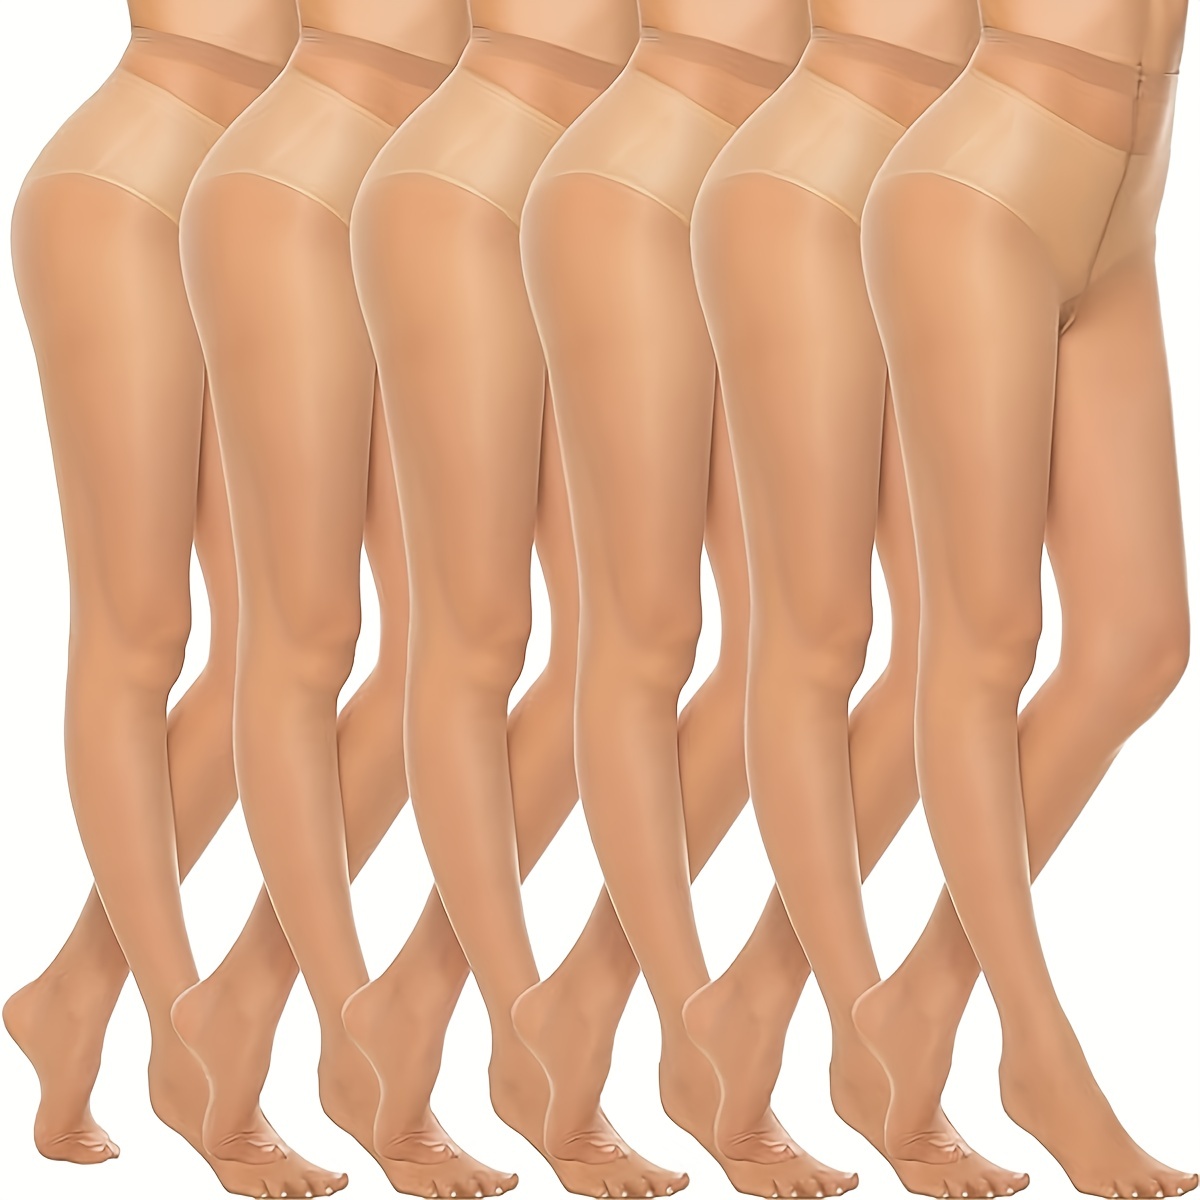 Sheer Pantyhose For Women - Slim Stretchy Control Top Footed